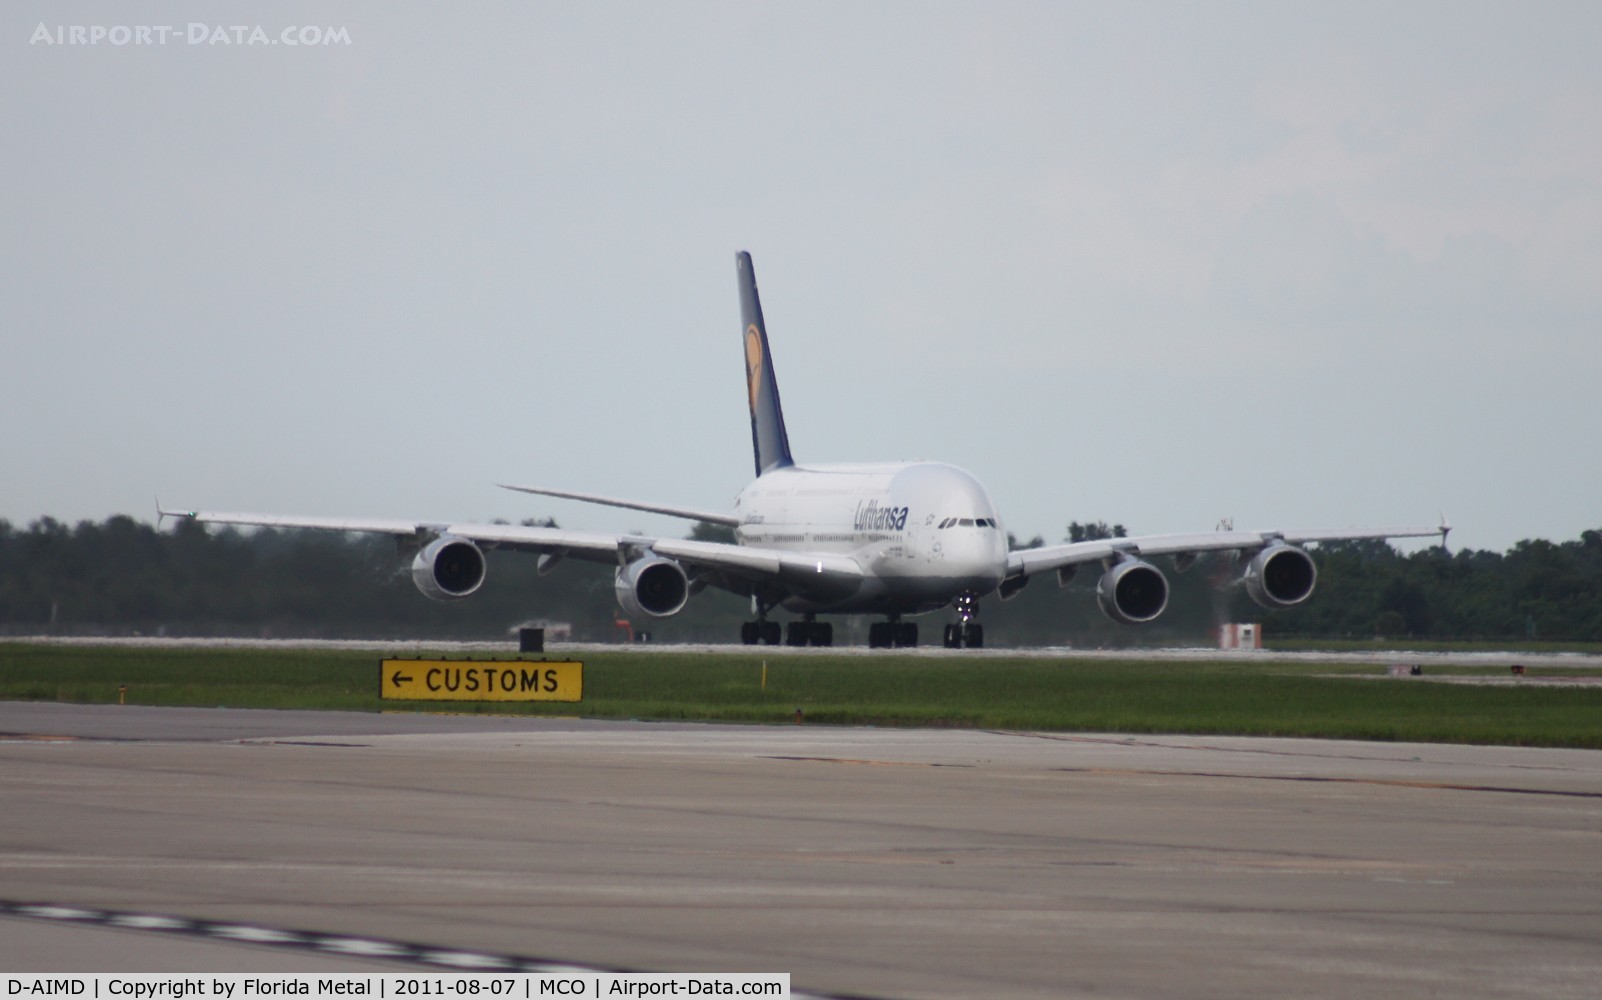 D-AIMD, 2010 Airbus A380-841 C/N 048, Lufthansa A380 starting its take off roll on Runway 18R